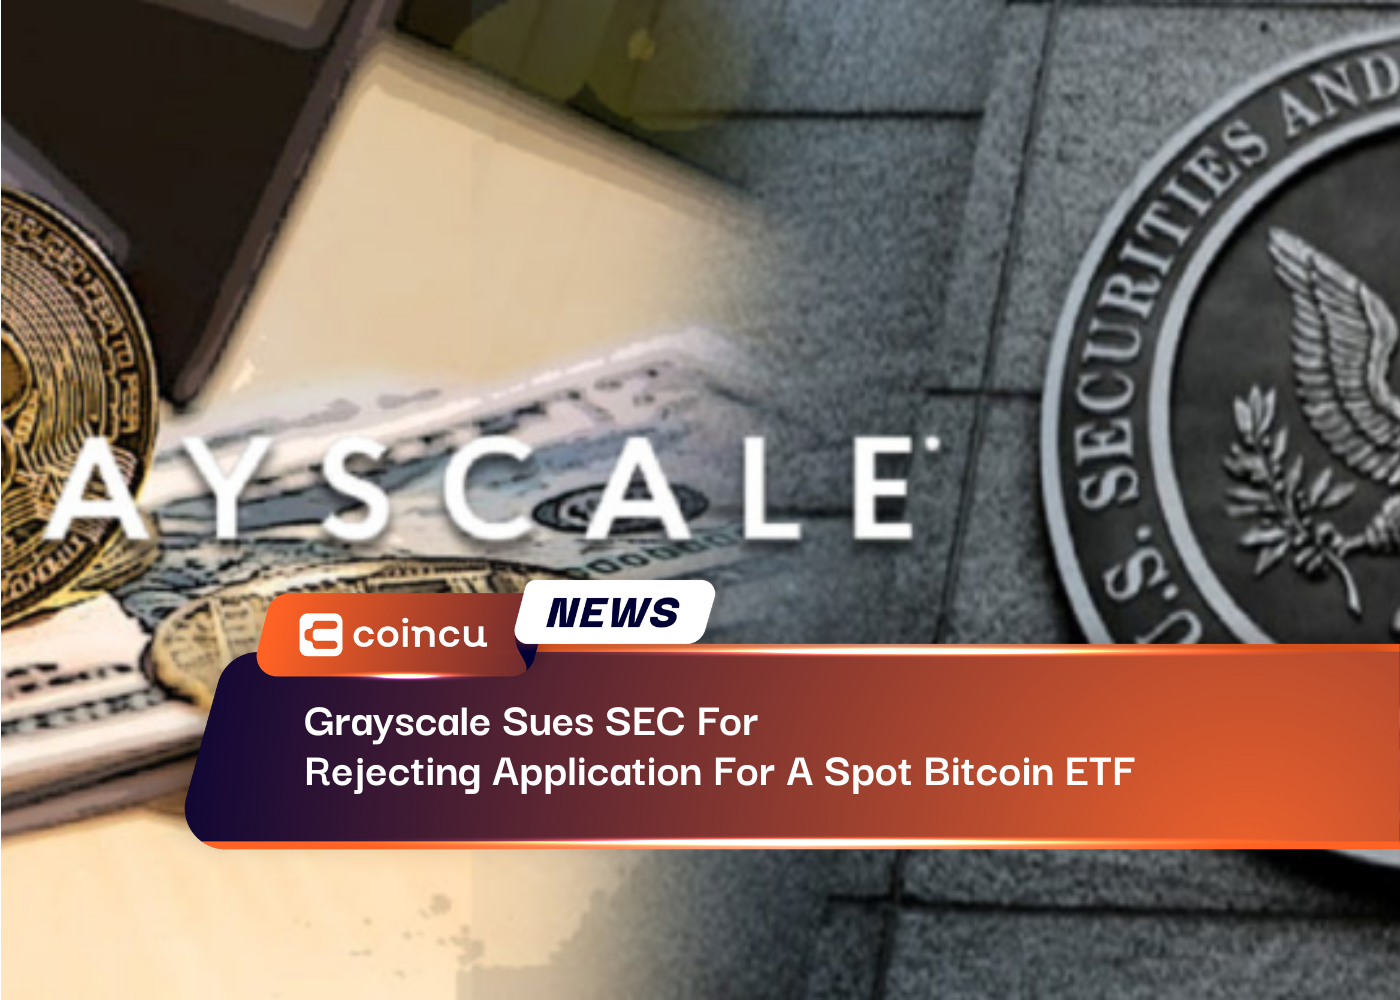 Grayscale Sues SEC For Rejecting Application For A Spot Bitcoin ETF